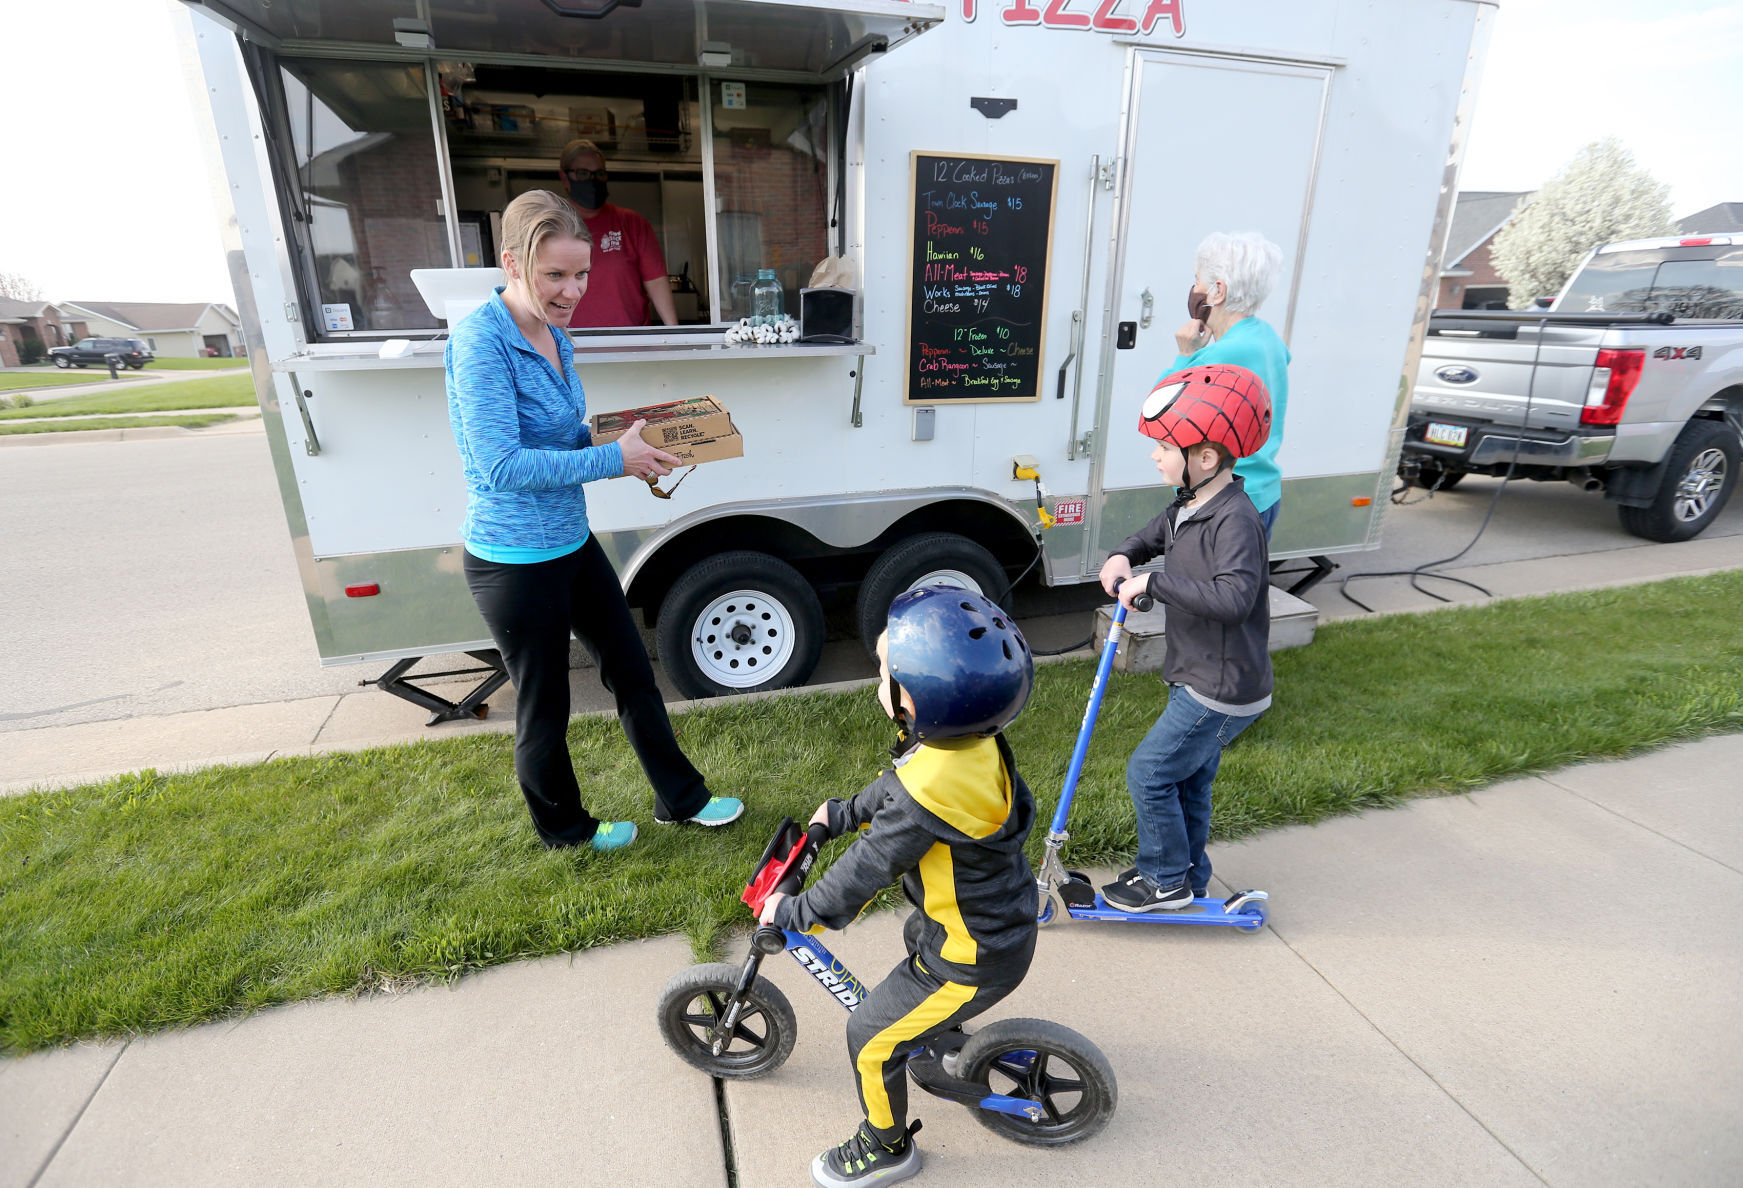 Jennifer Billmeyer grabs a pizza from Irene Nelson, co-owner of Town Clock Inn, with her sons Oliver (left), 3, and Owen, 6, on Thursday in Asbury, Iowa. PHOTO CREDIT: JESSICA REILLY